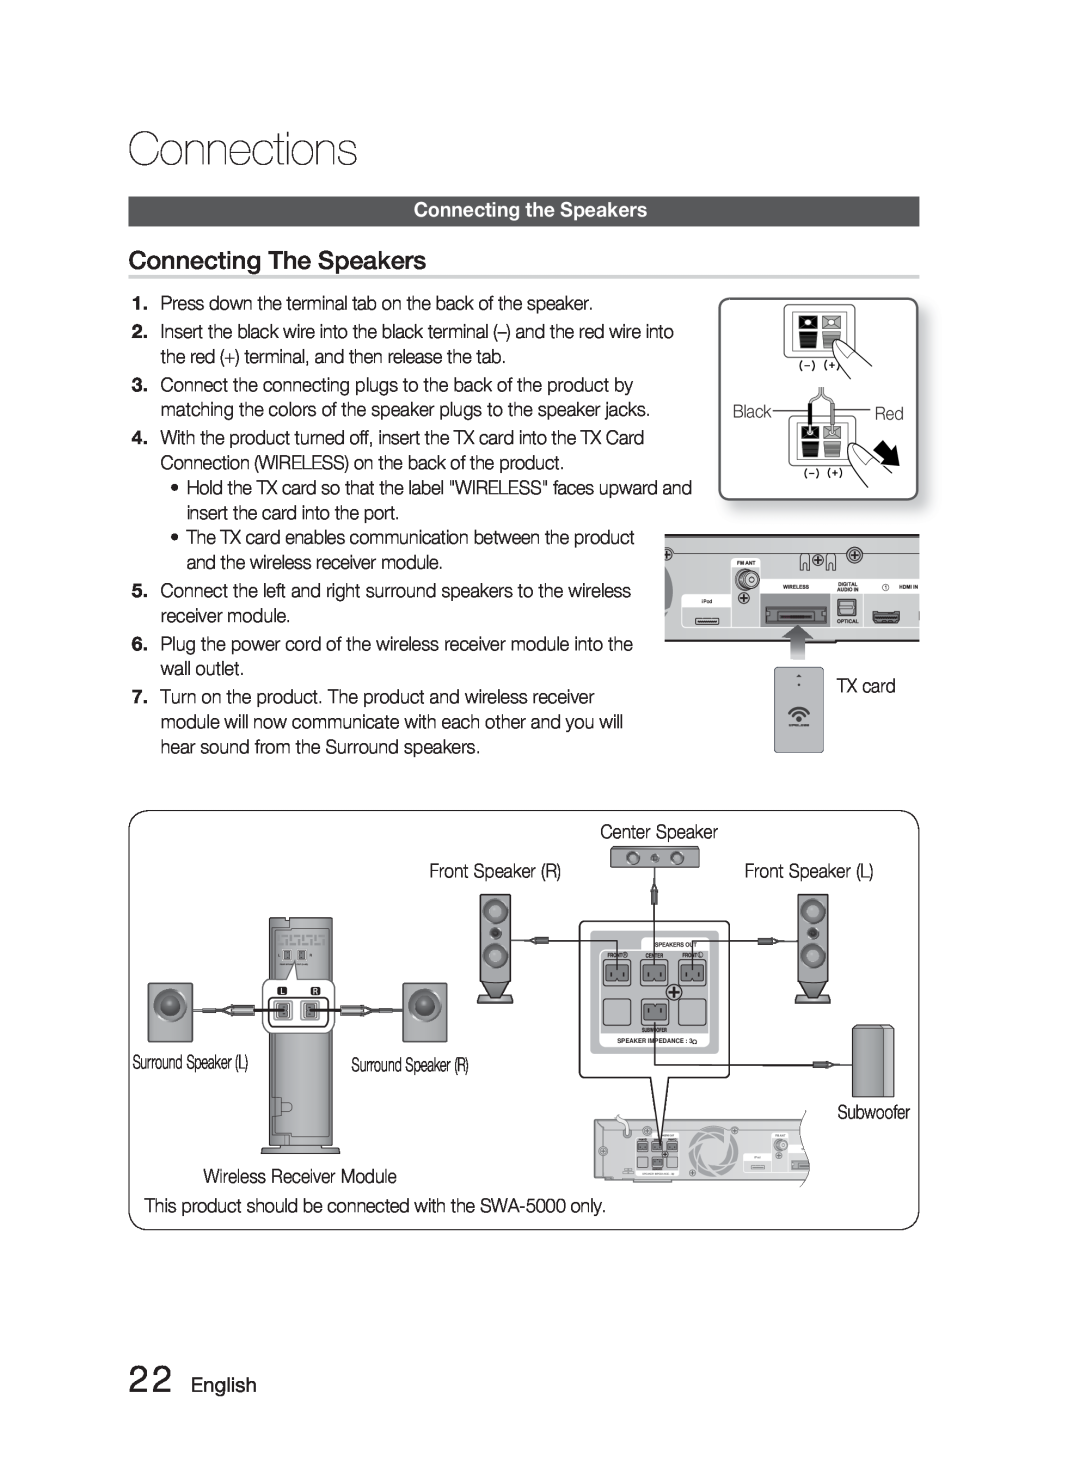 Samsung HT-C6900W user manual Connecting The Speakers, English, Connections, Connecting the Speakers 